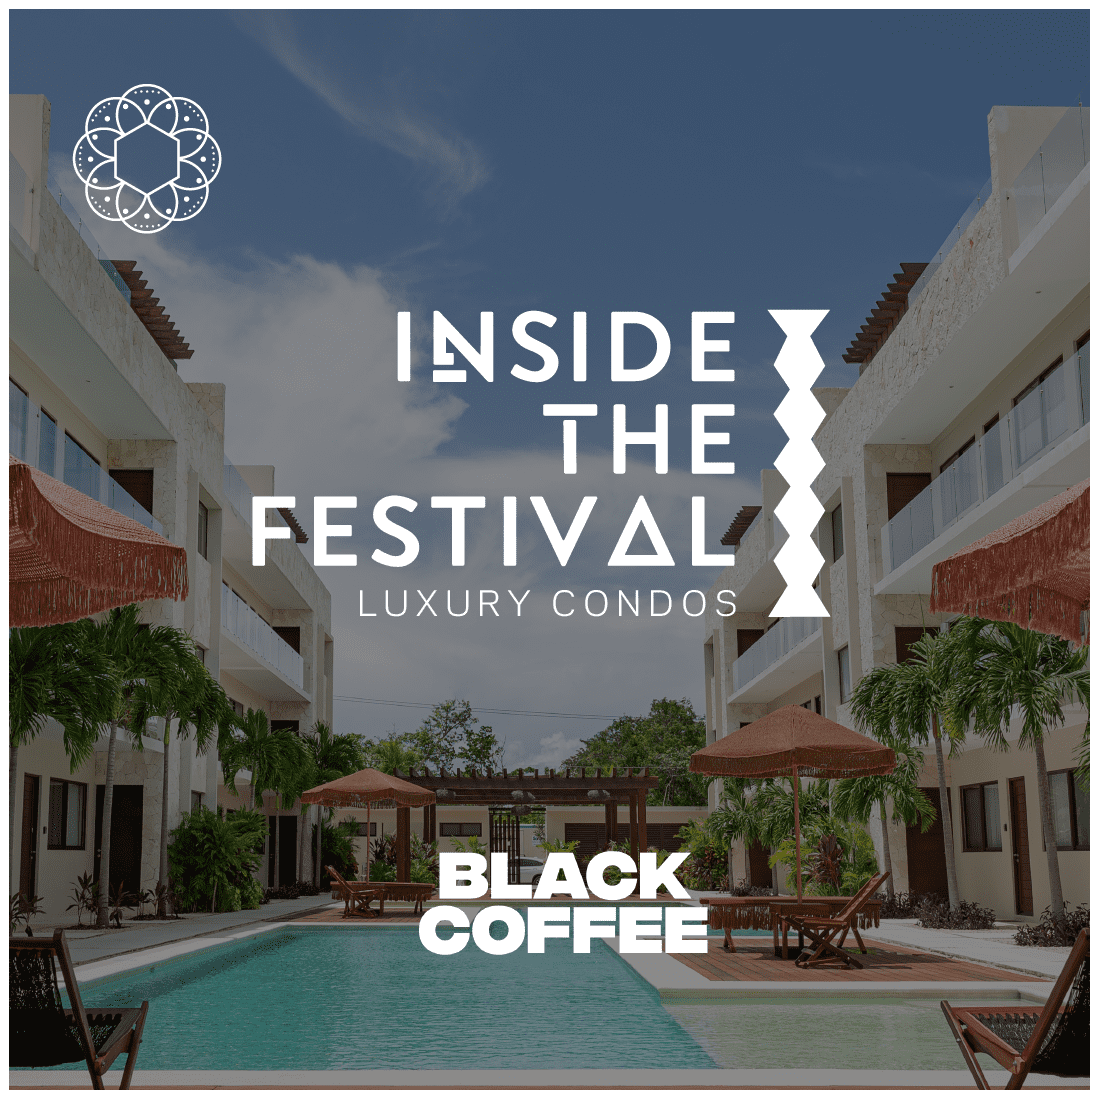 INSIDE THE FESTIVAL: 2 nights at Luxury Condo + Backstage Tickets - BLACK COFFEE